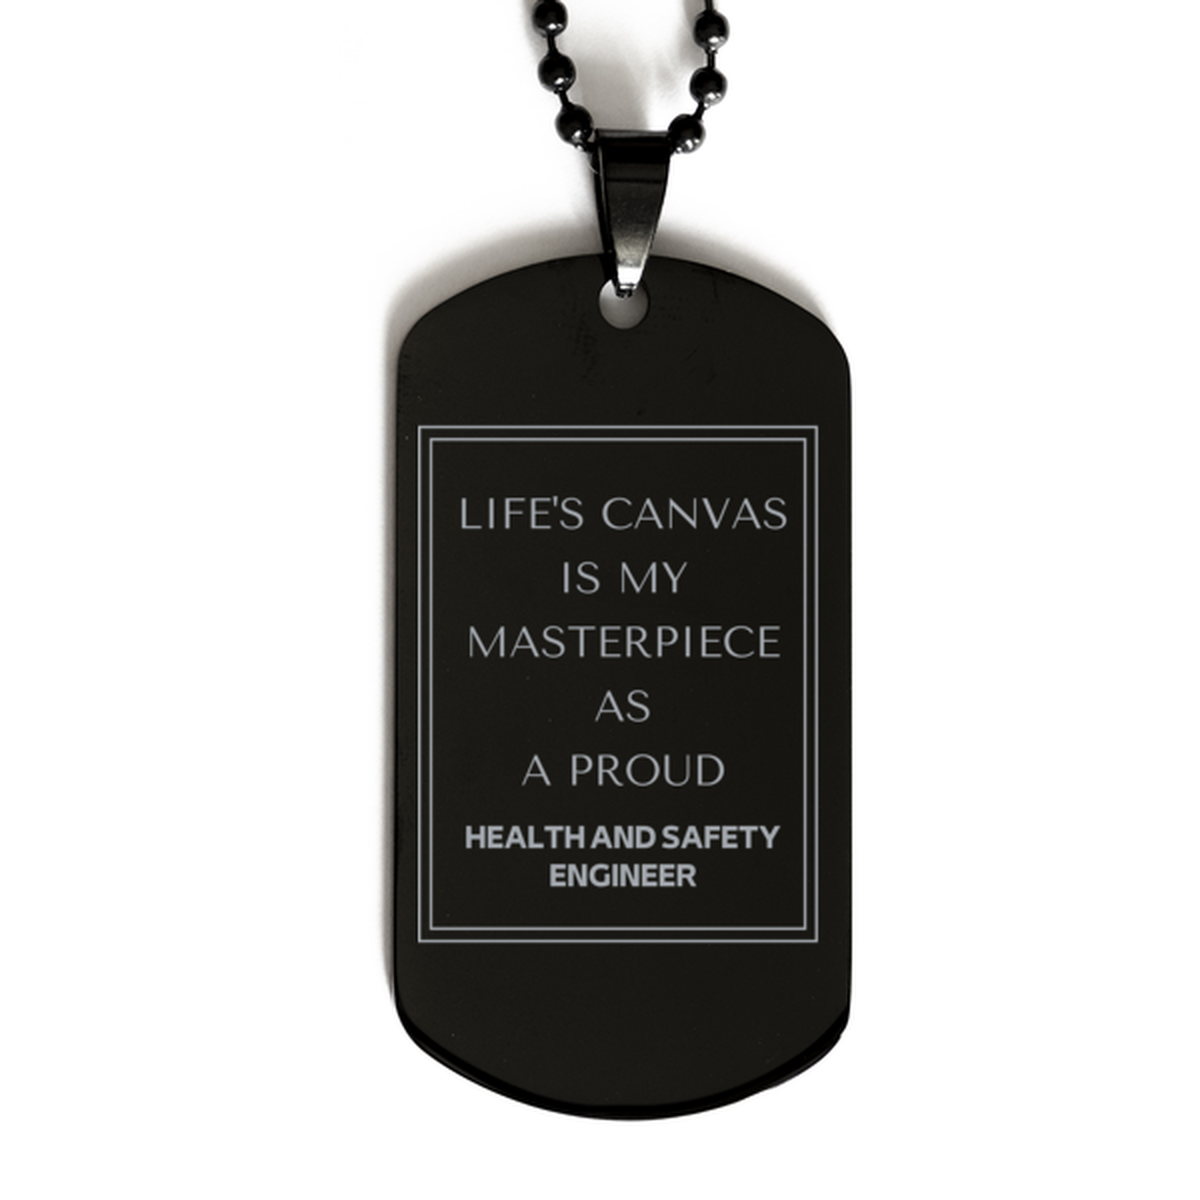 Proud Health and Safety Engineer Gifts, Life's canvas is my masterpiece, Epic Birthday Christmas Unique Black Dog Tag For Health and Safety Engineer, Coworkers, Men, Women, Friends